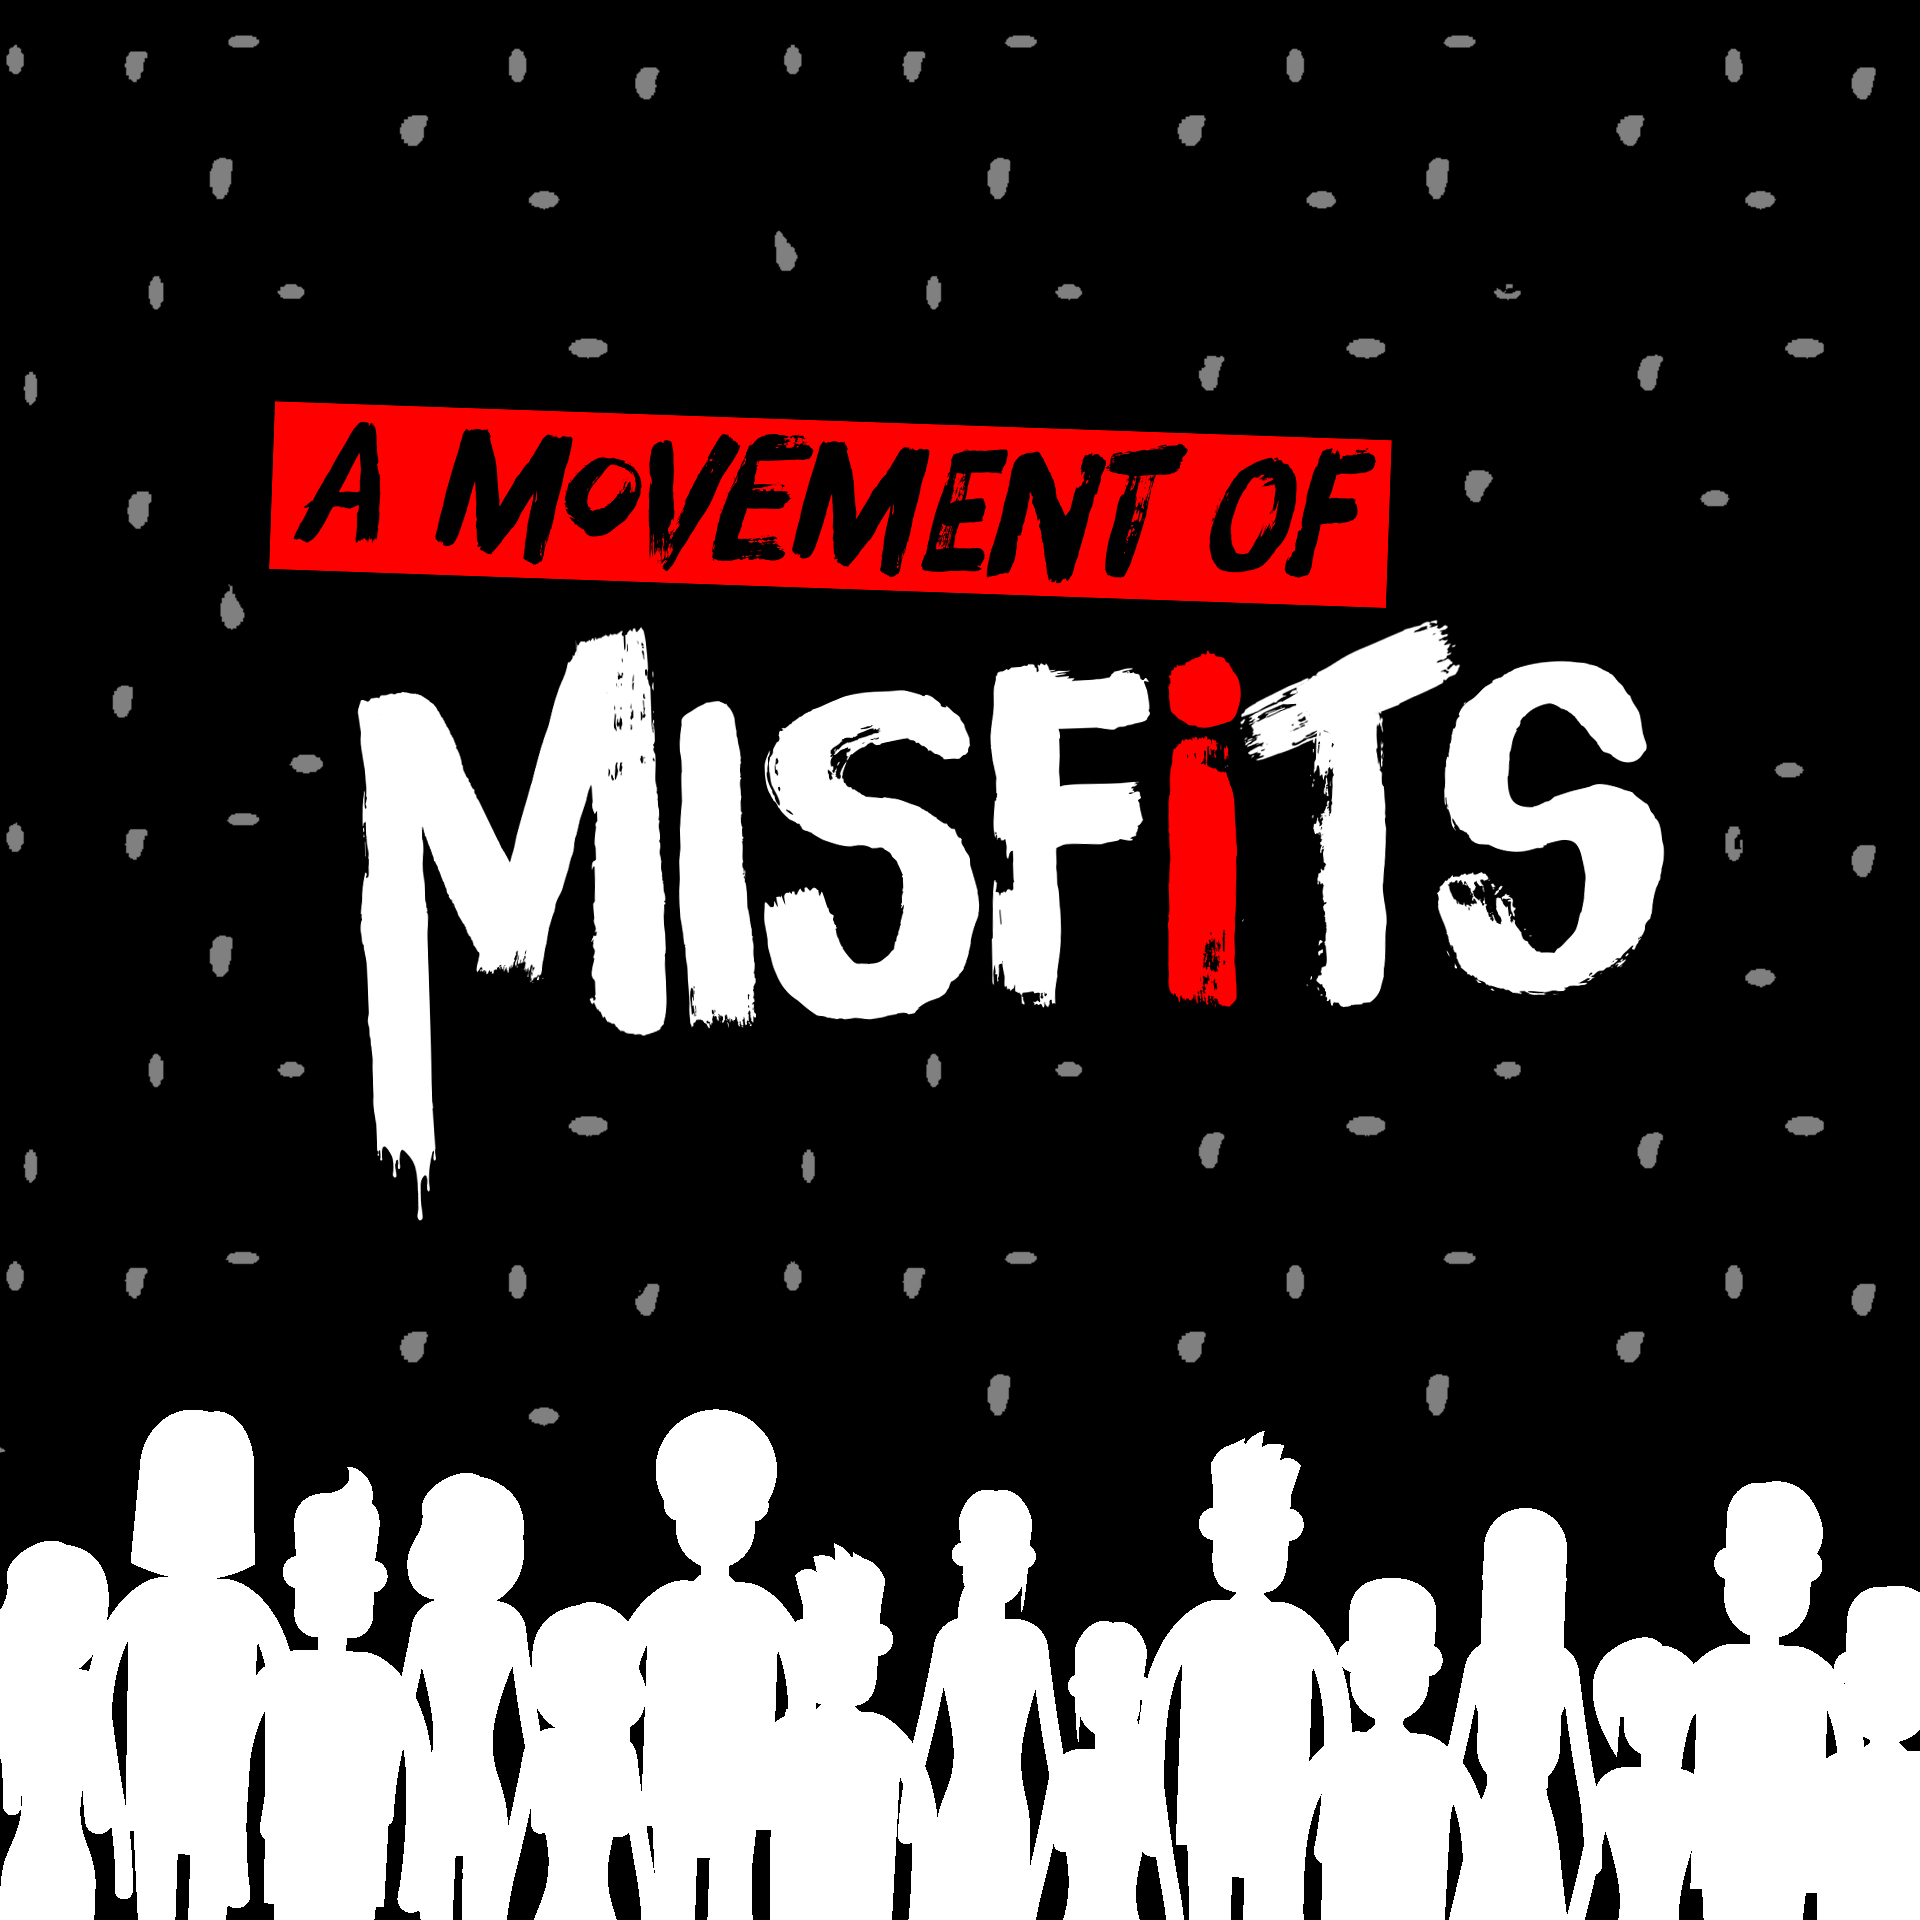 A Movement of Misfits #4: Acts 4